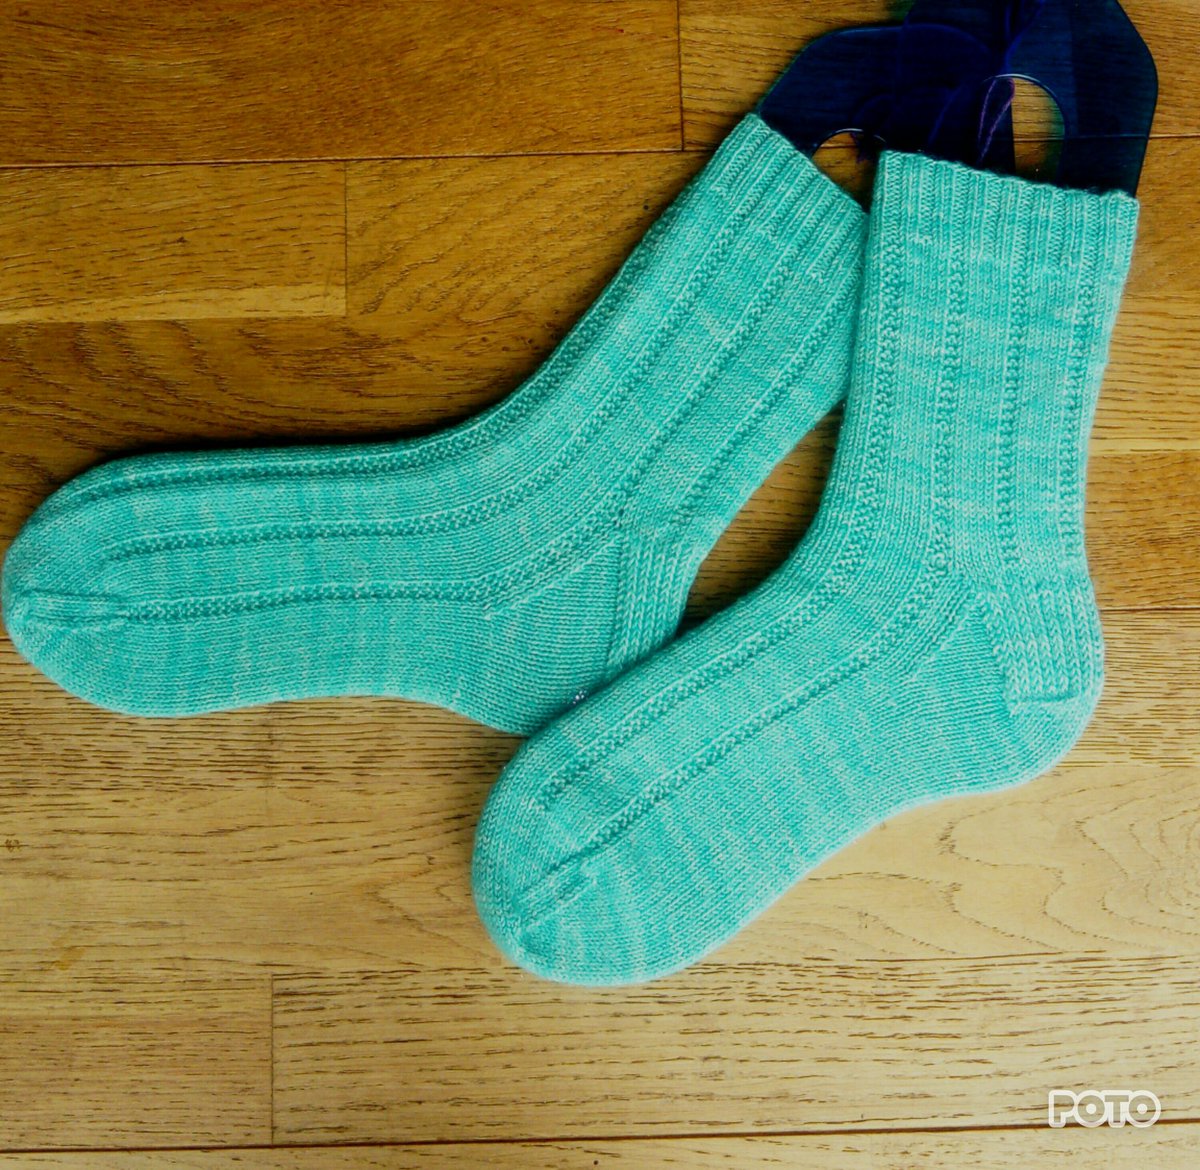 These are just one pair of socks for sale in my #Etsy shop now 😀 #handknit #socks #gifts #handknitsocks #handknitgifts #wool #yarn